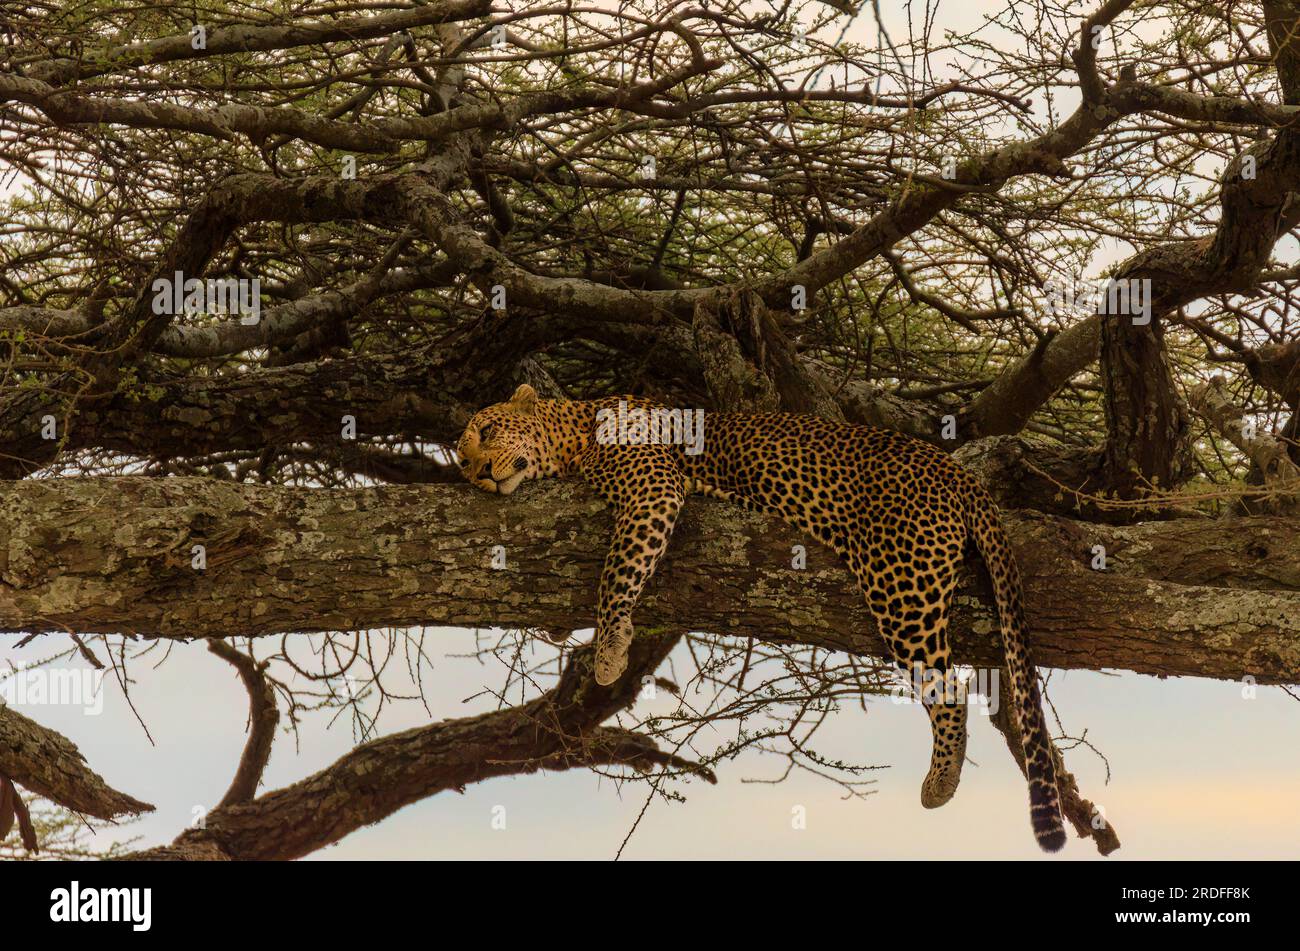 Photograph Of A Male Leopard Lying On An Acacia Tree During A Sunset In